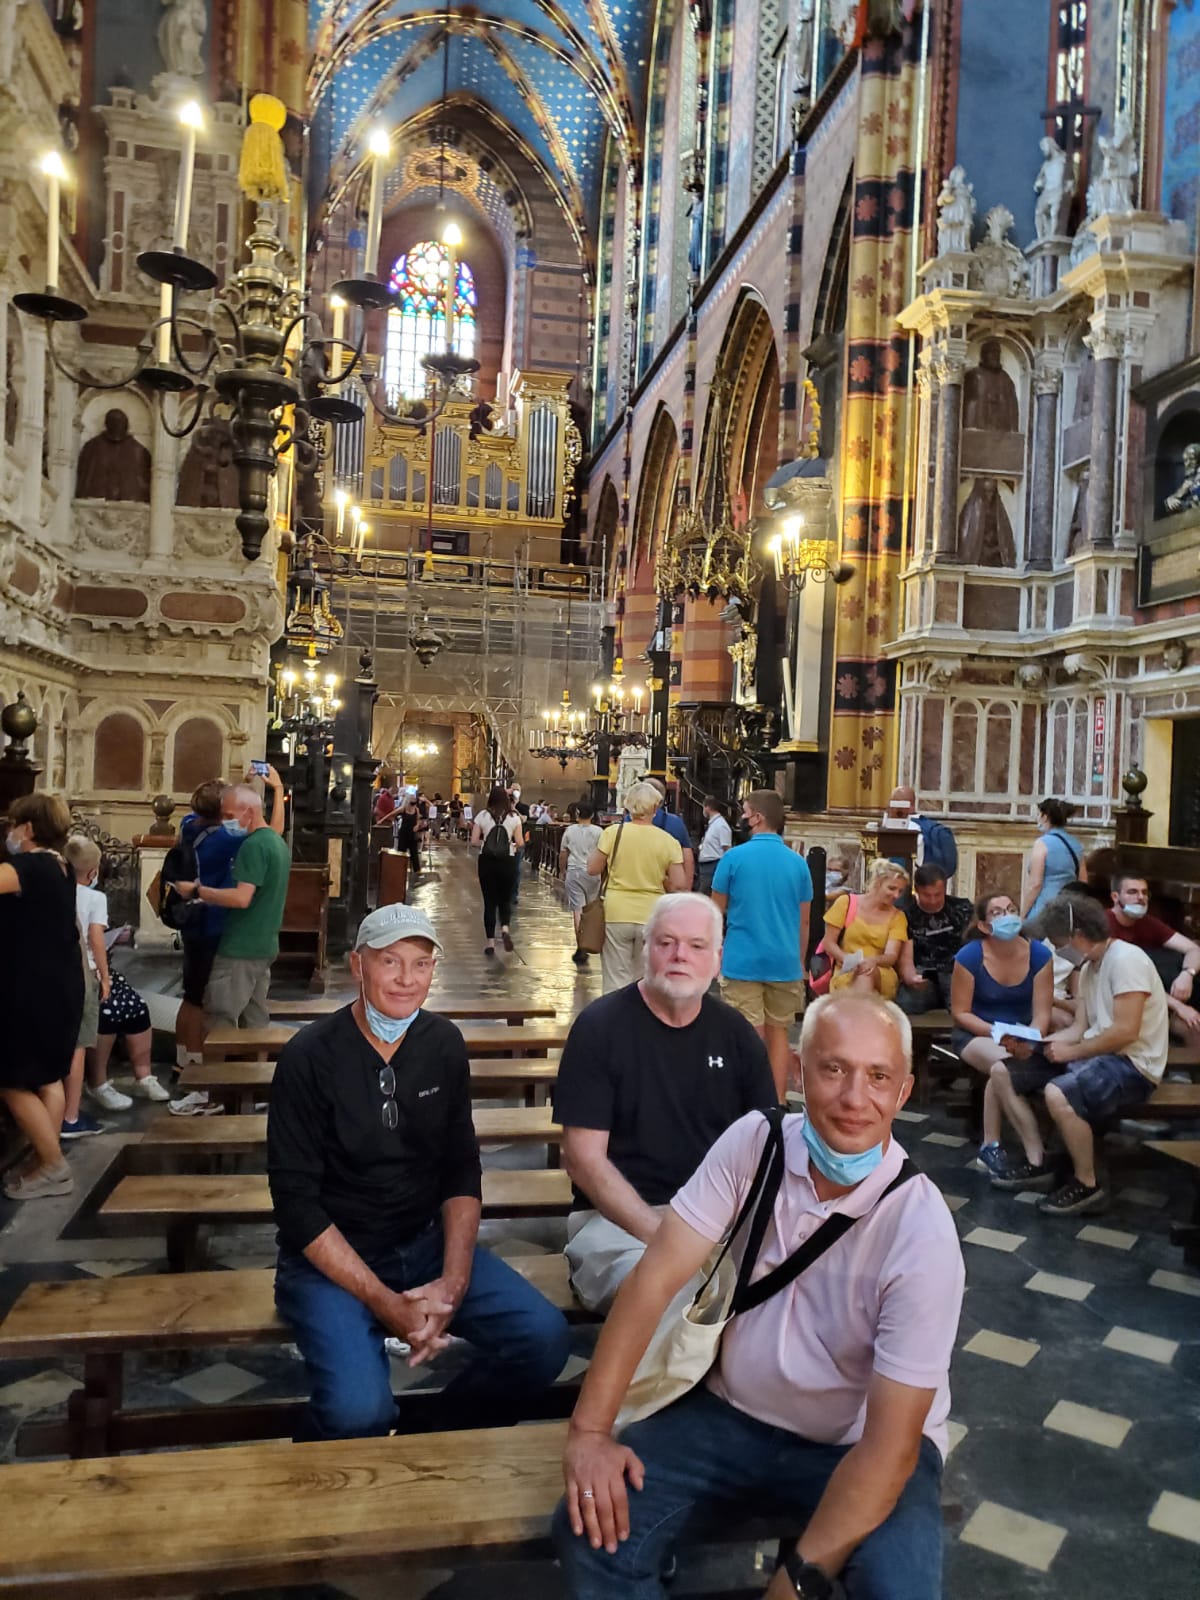 After exploring St Mary Bassilica in Cracow- 2022